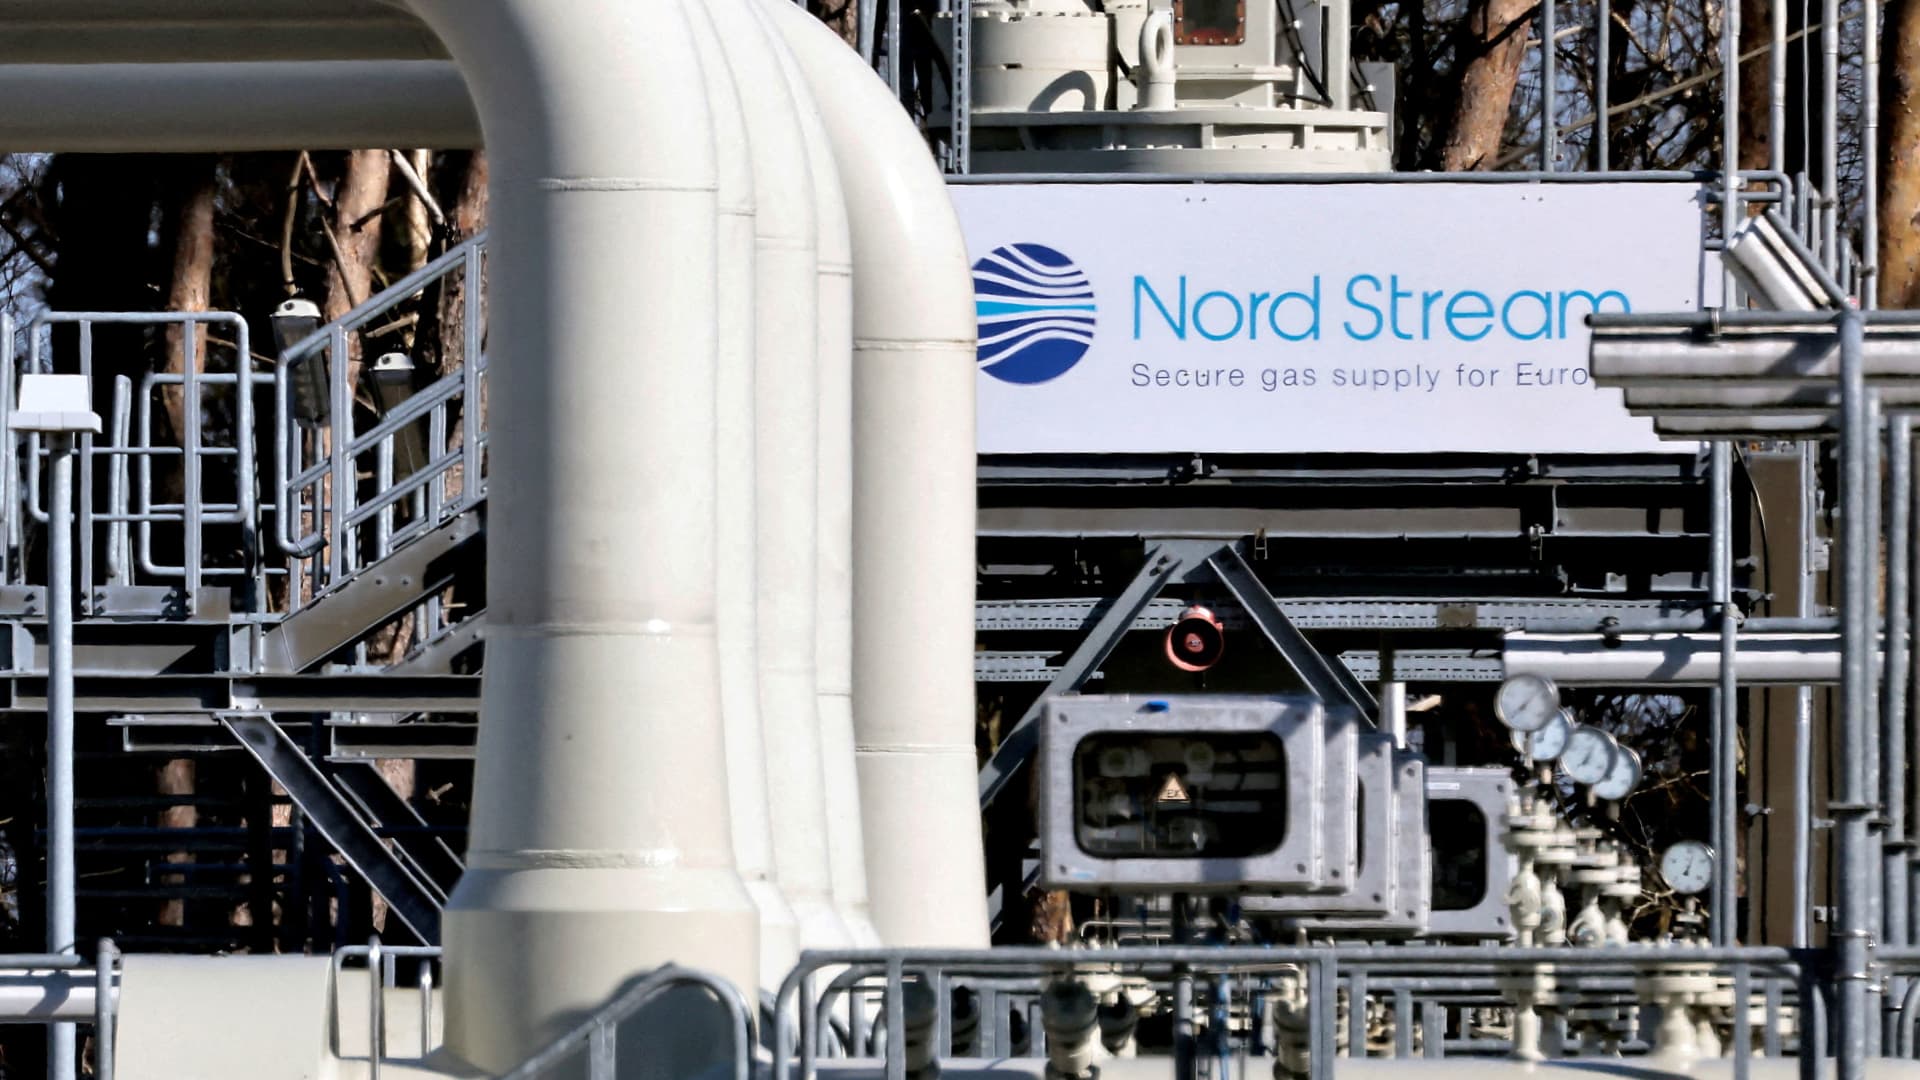 Four Nord Stream pipeline scenarios with global markets on edge ahead of crucial Gazprom decision